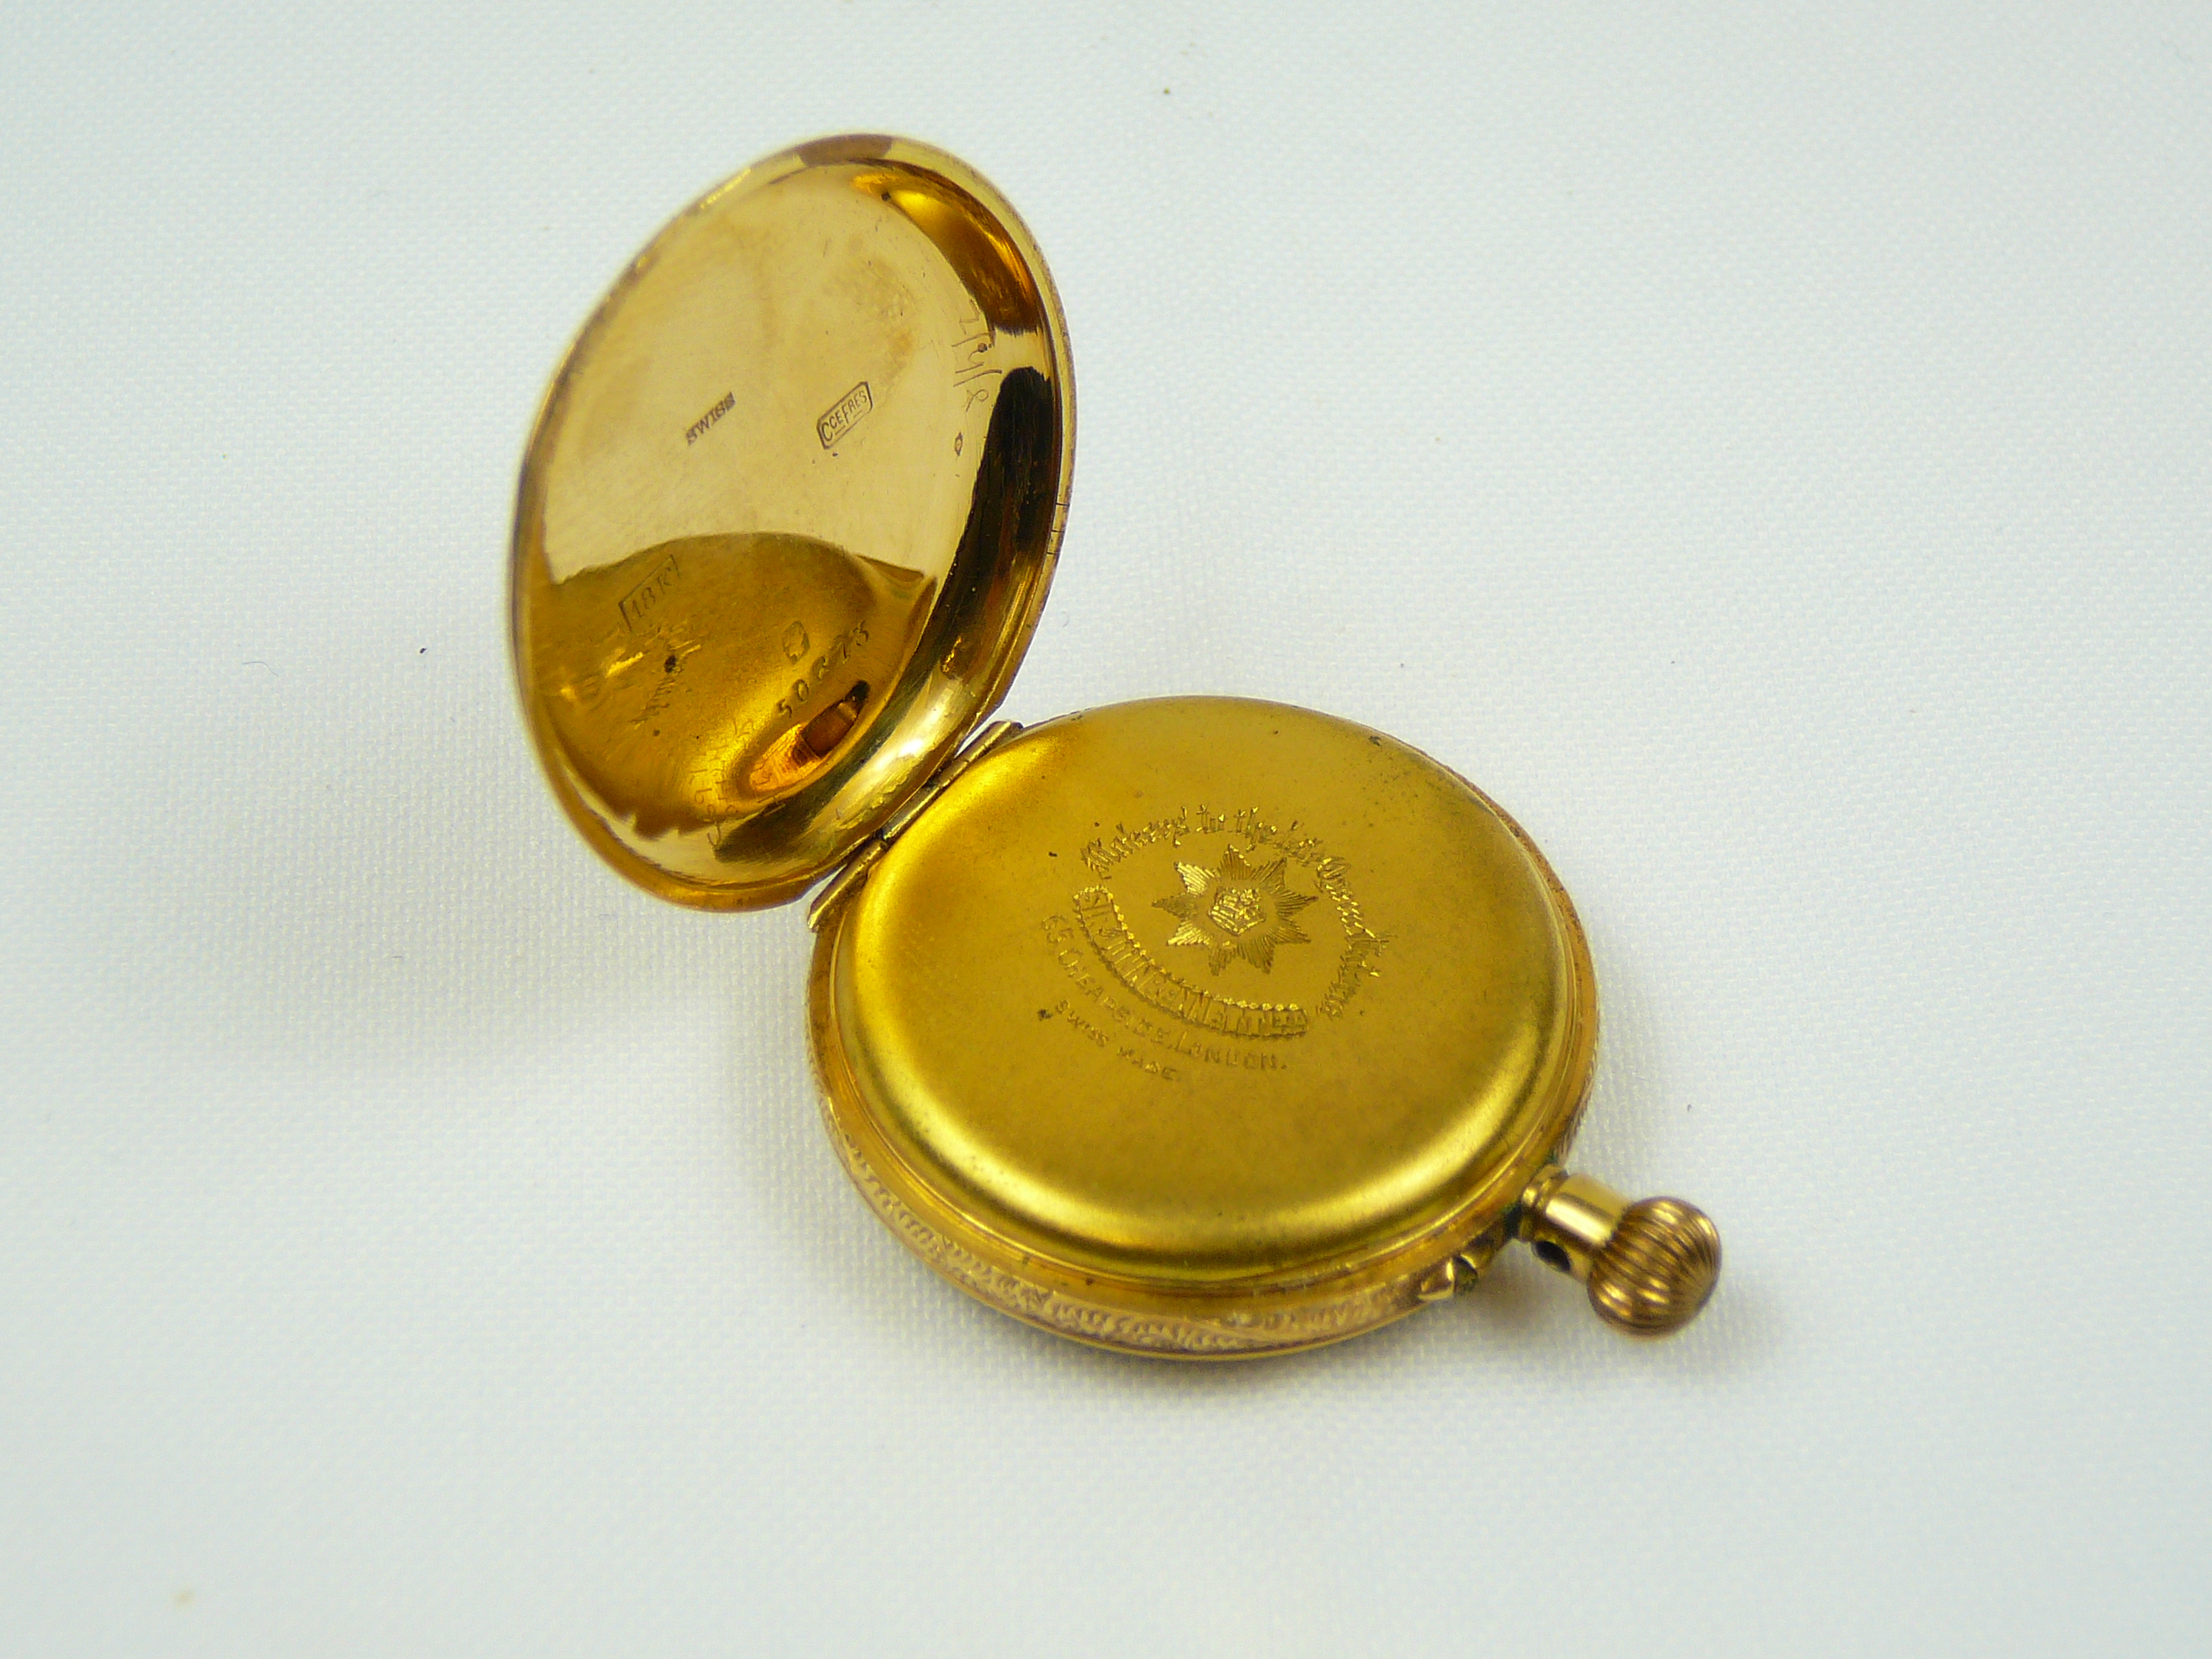 Ladies gold fob watch - Image 3 of 4